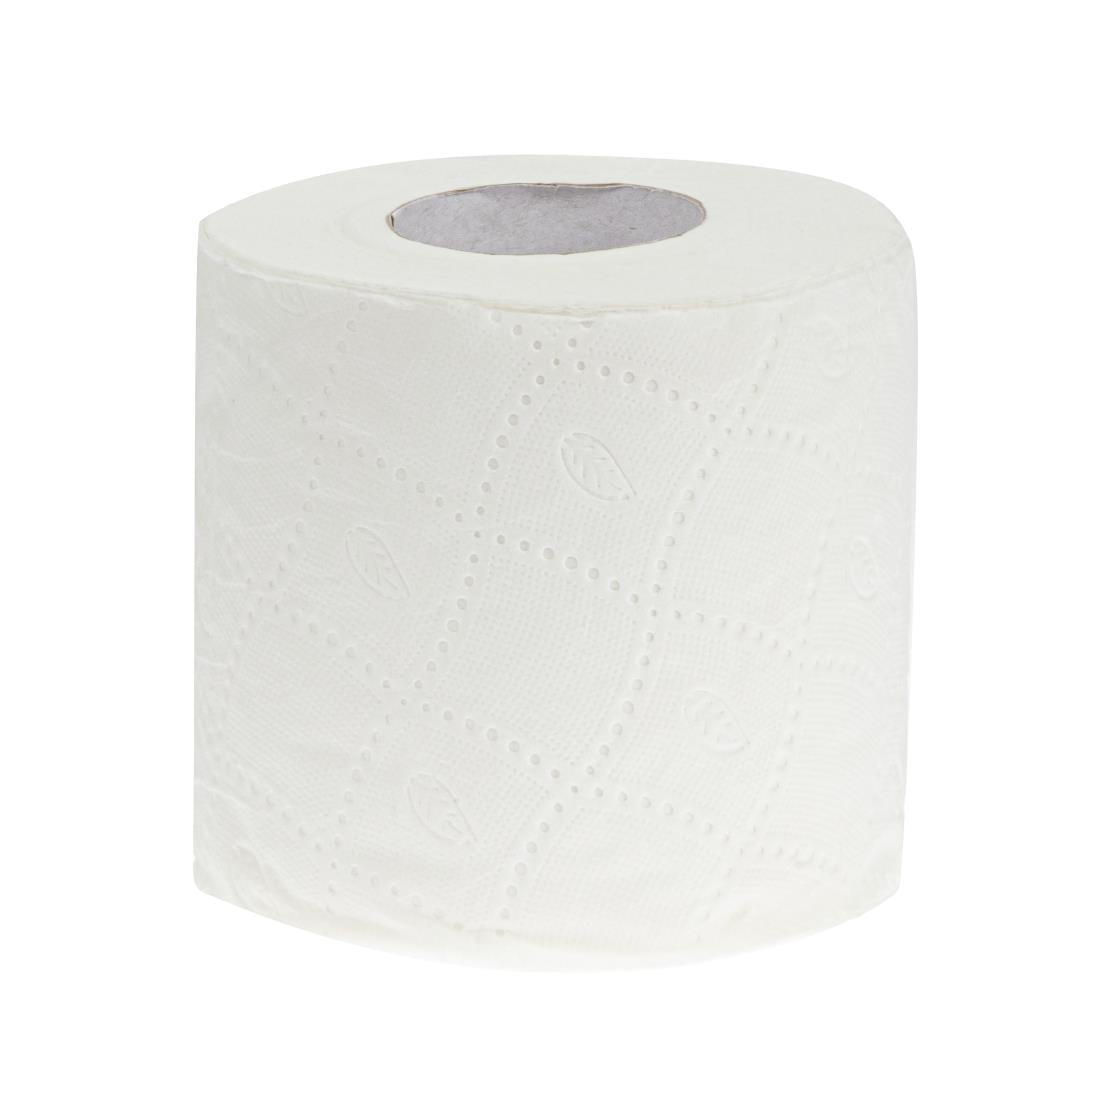 DB467 Tork Extra Soft Premium Toilet Paper 3-Ply 20.4m (Pack of 40)